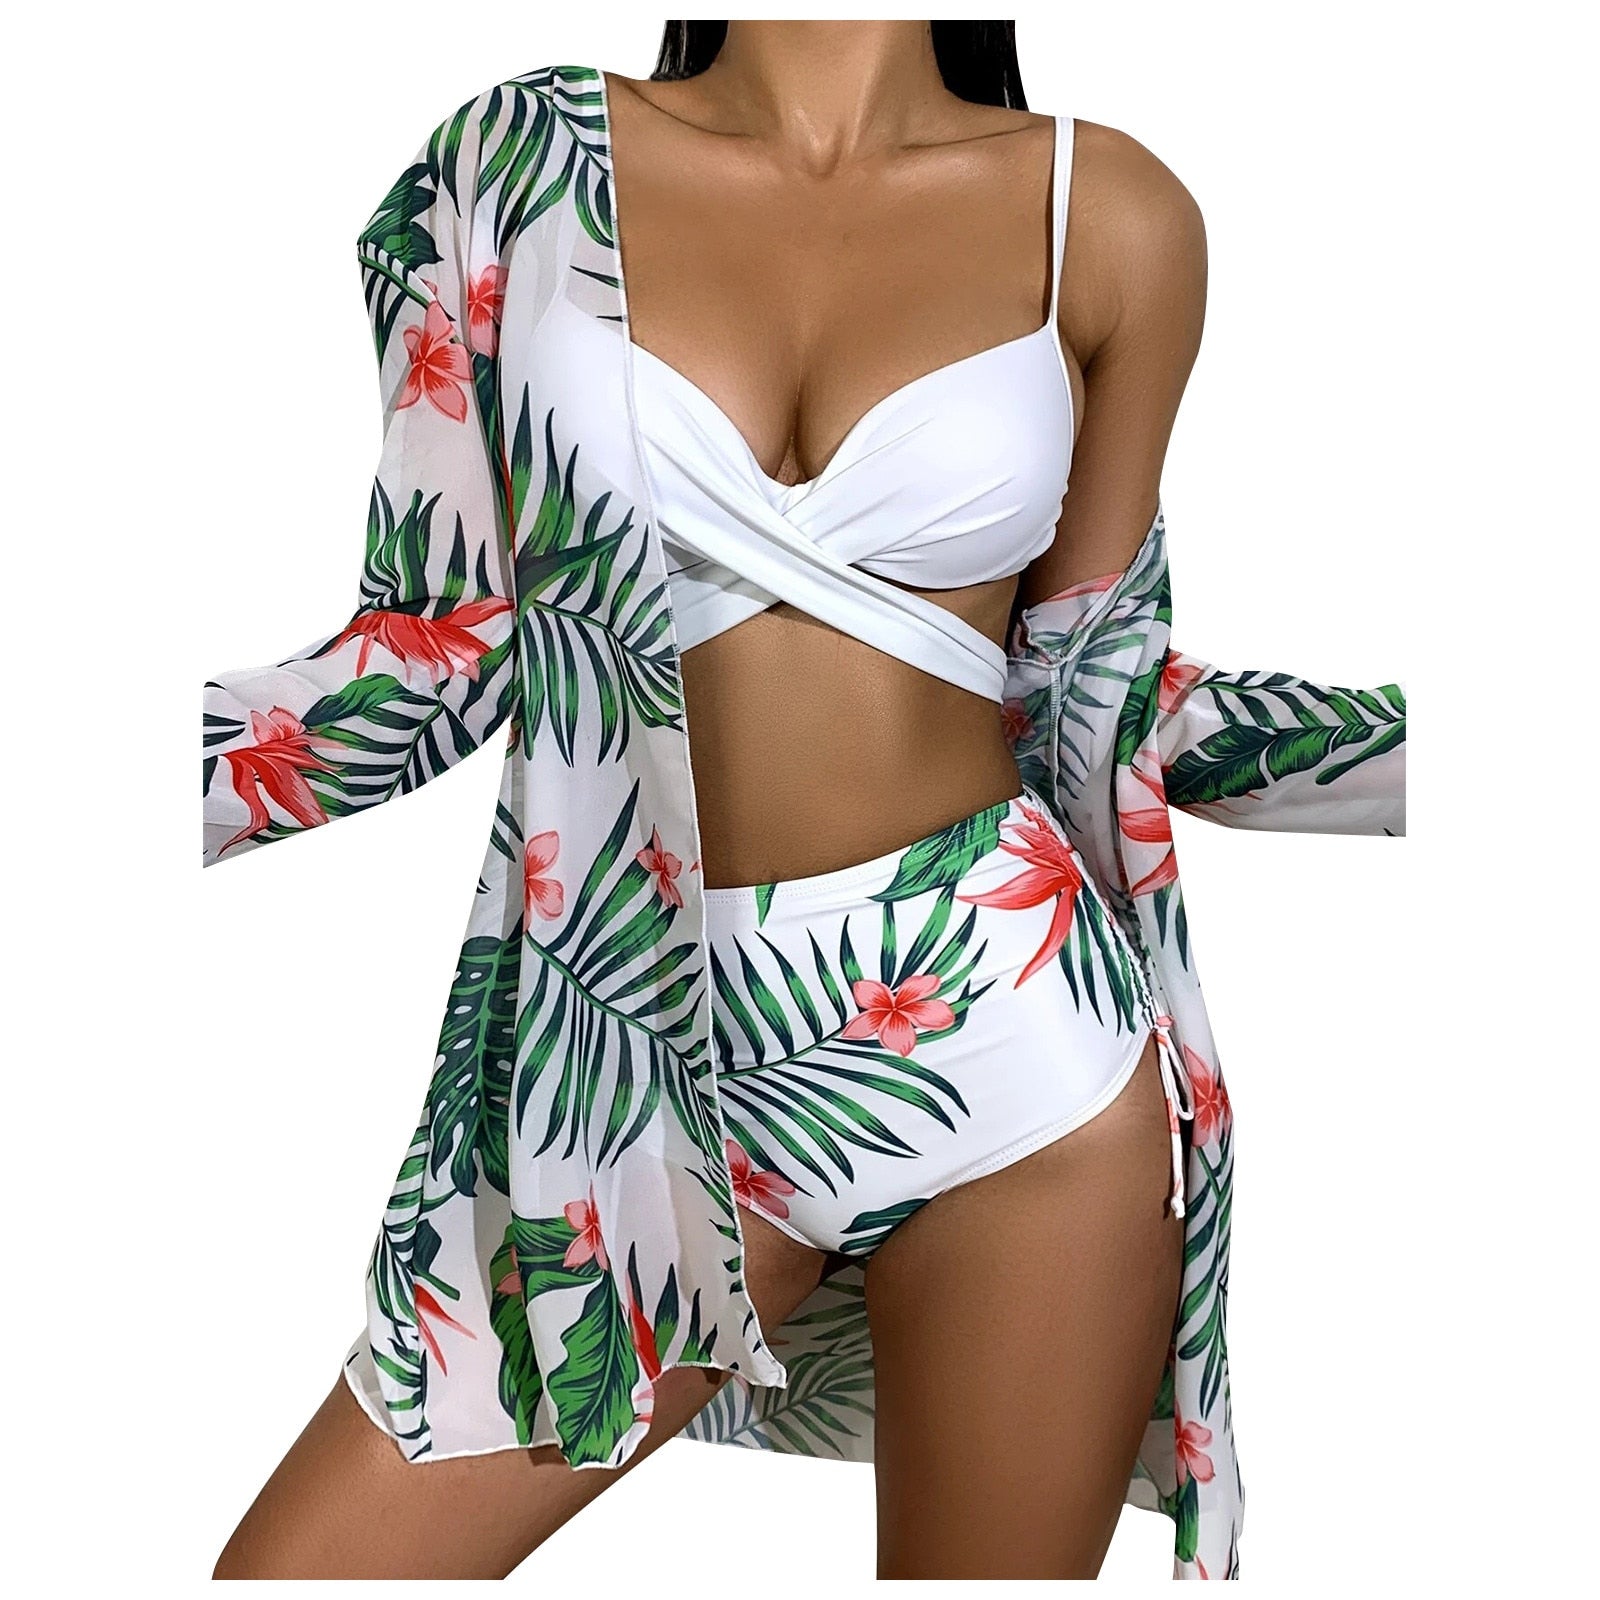 Sexy Bikini Summer swimsuit suit Three Piece with matching cover up